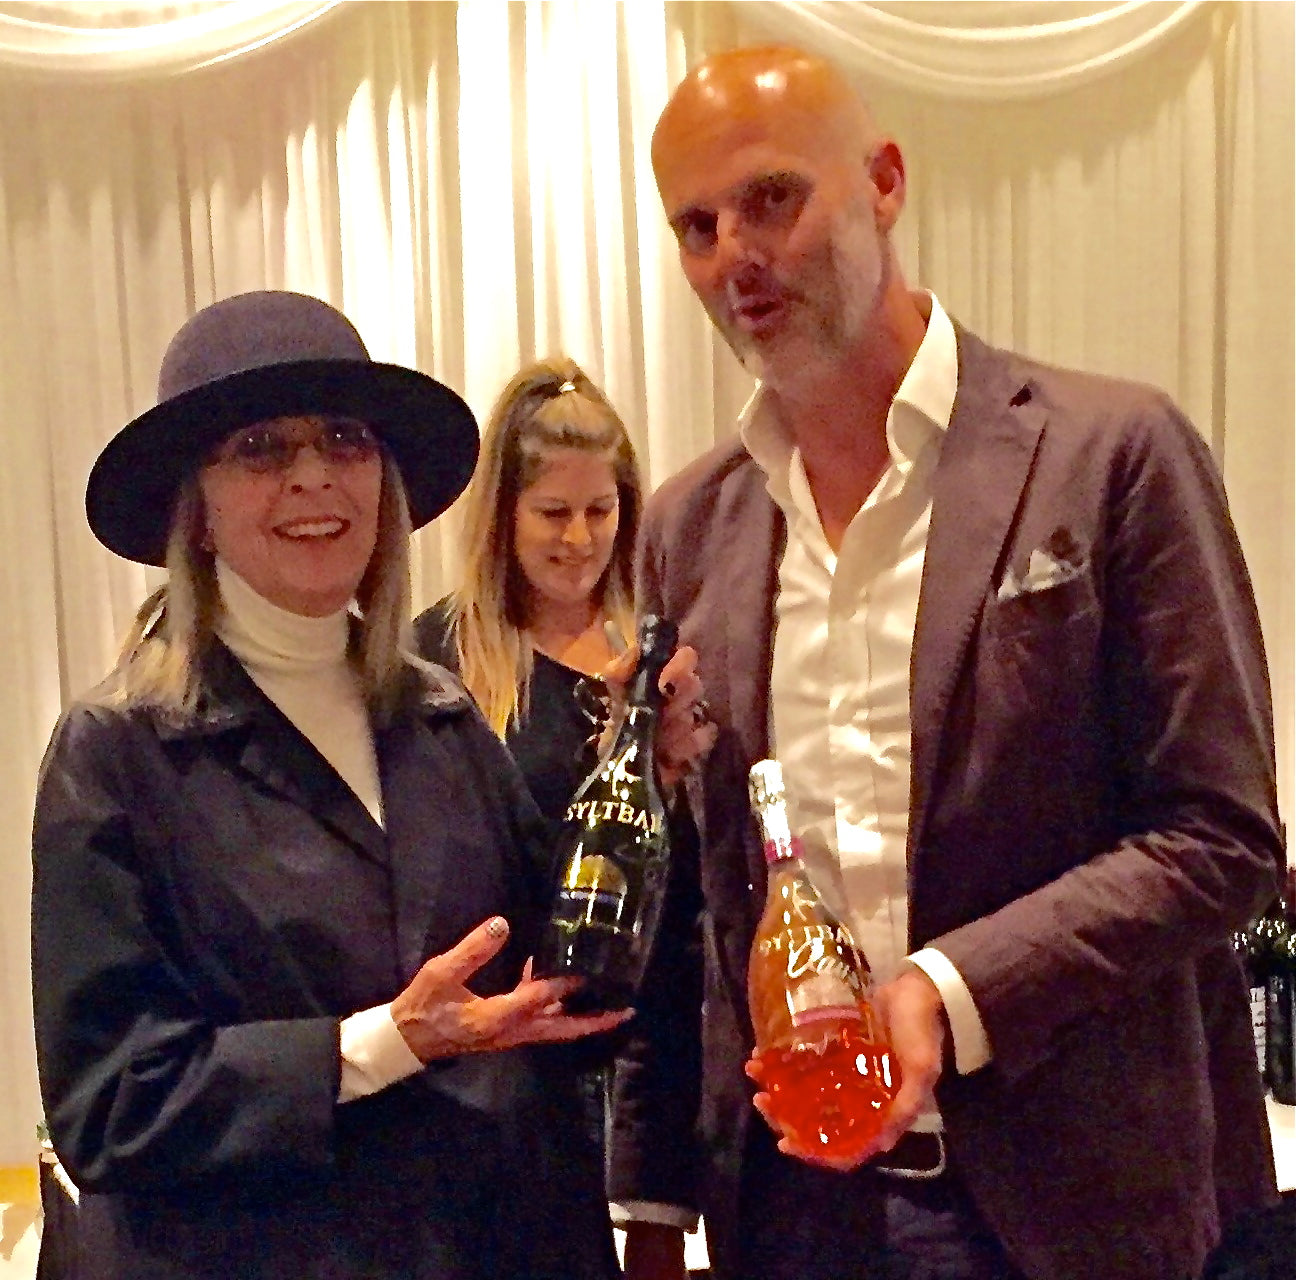 Meeting Diane Keaton with Claus Blohm owner of SYLTBAR